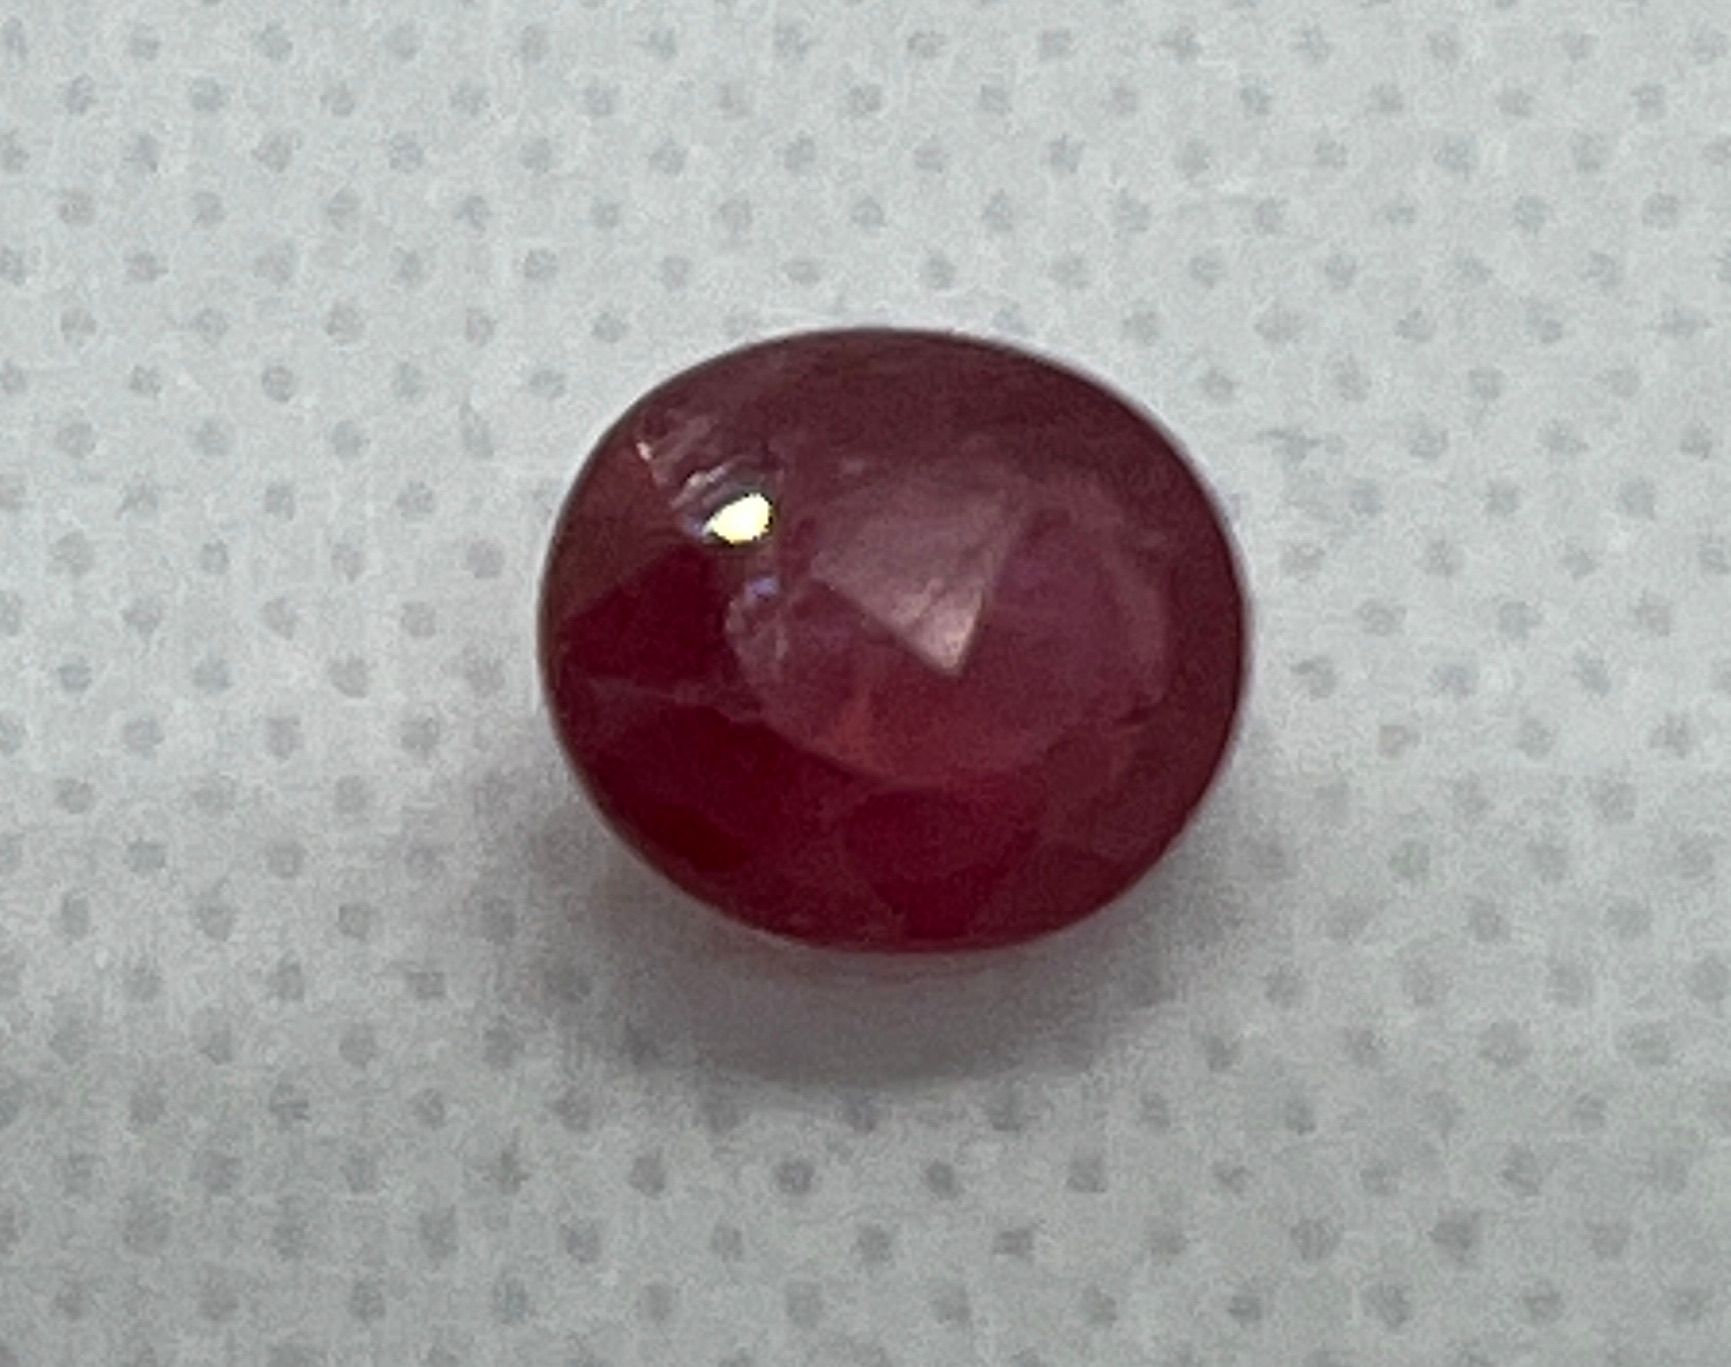 RUBIS 4.66 carat RED RUBY AIGT warranty certificate